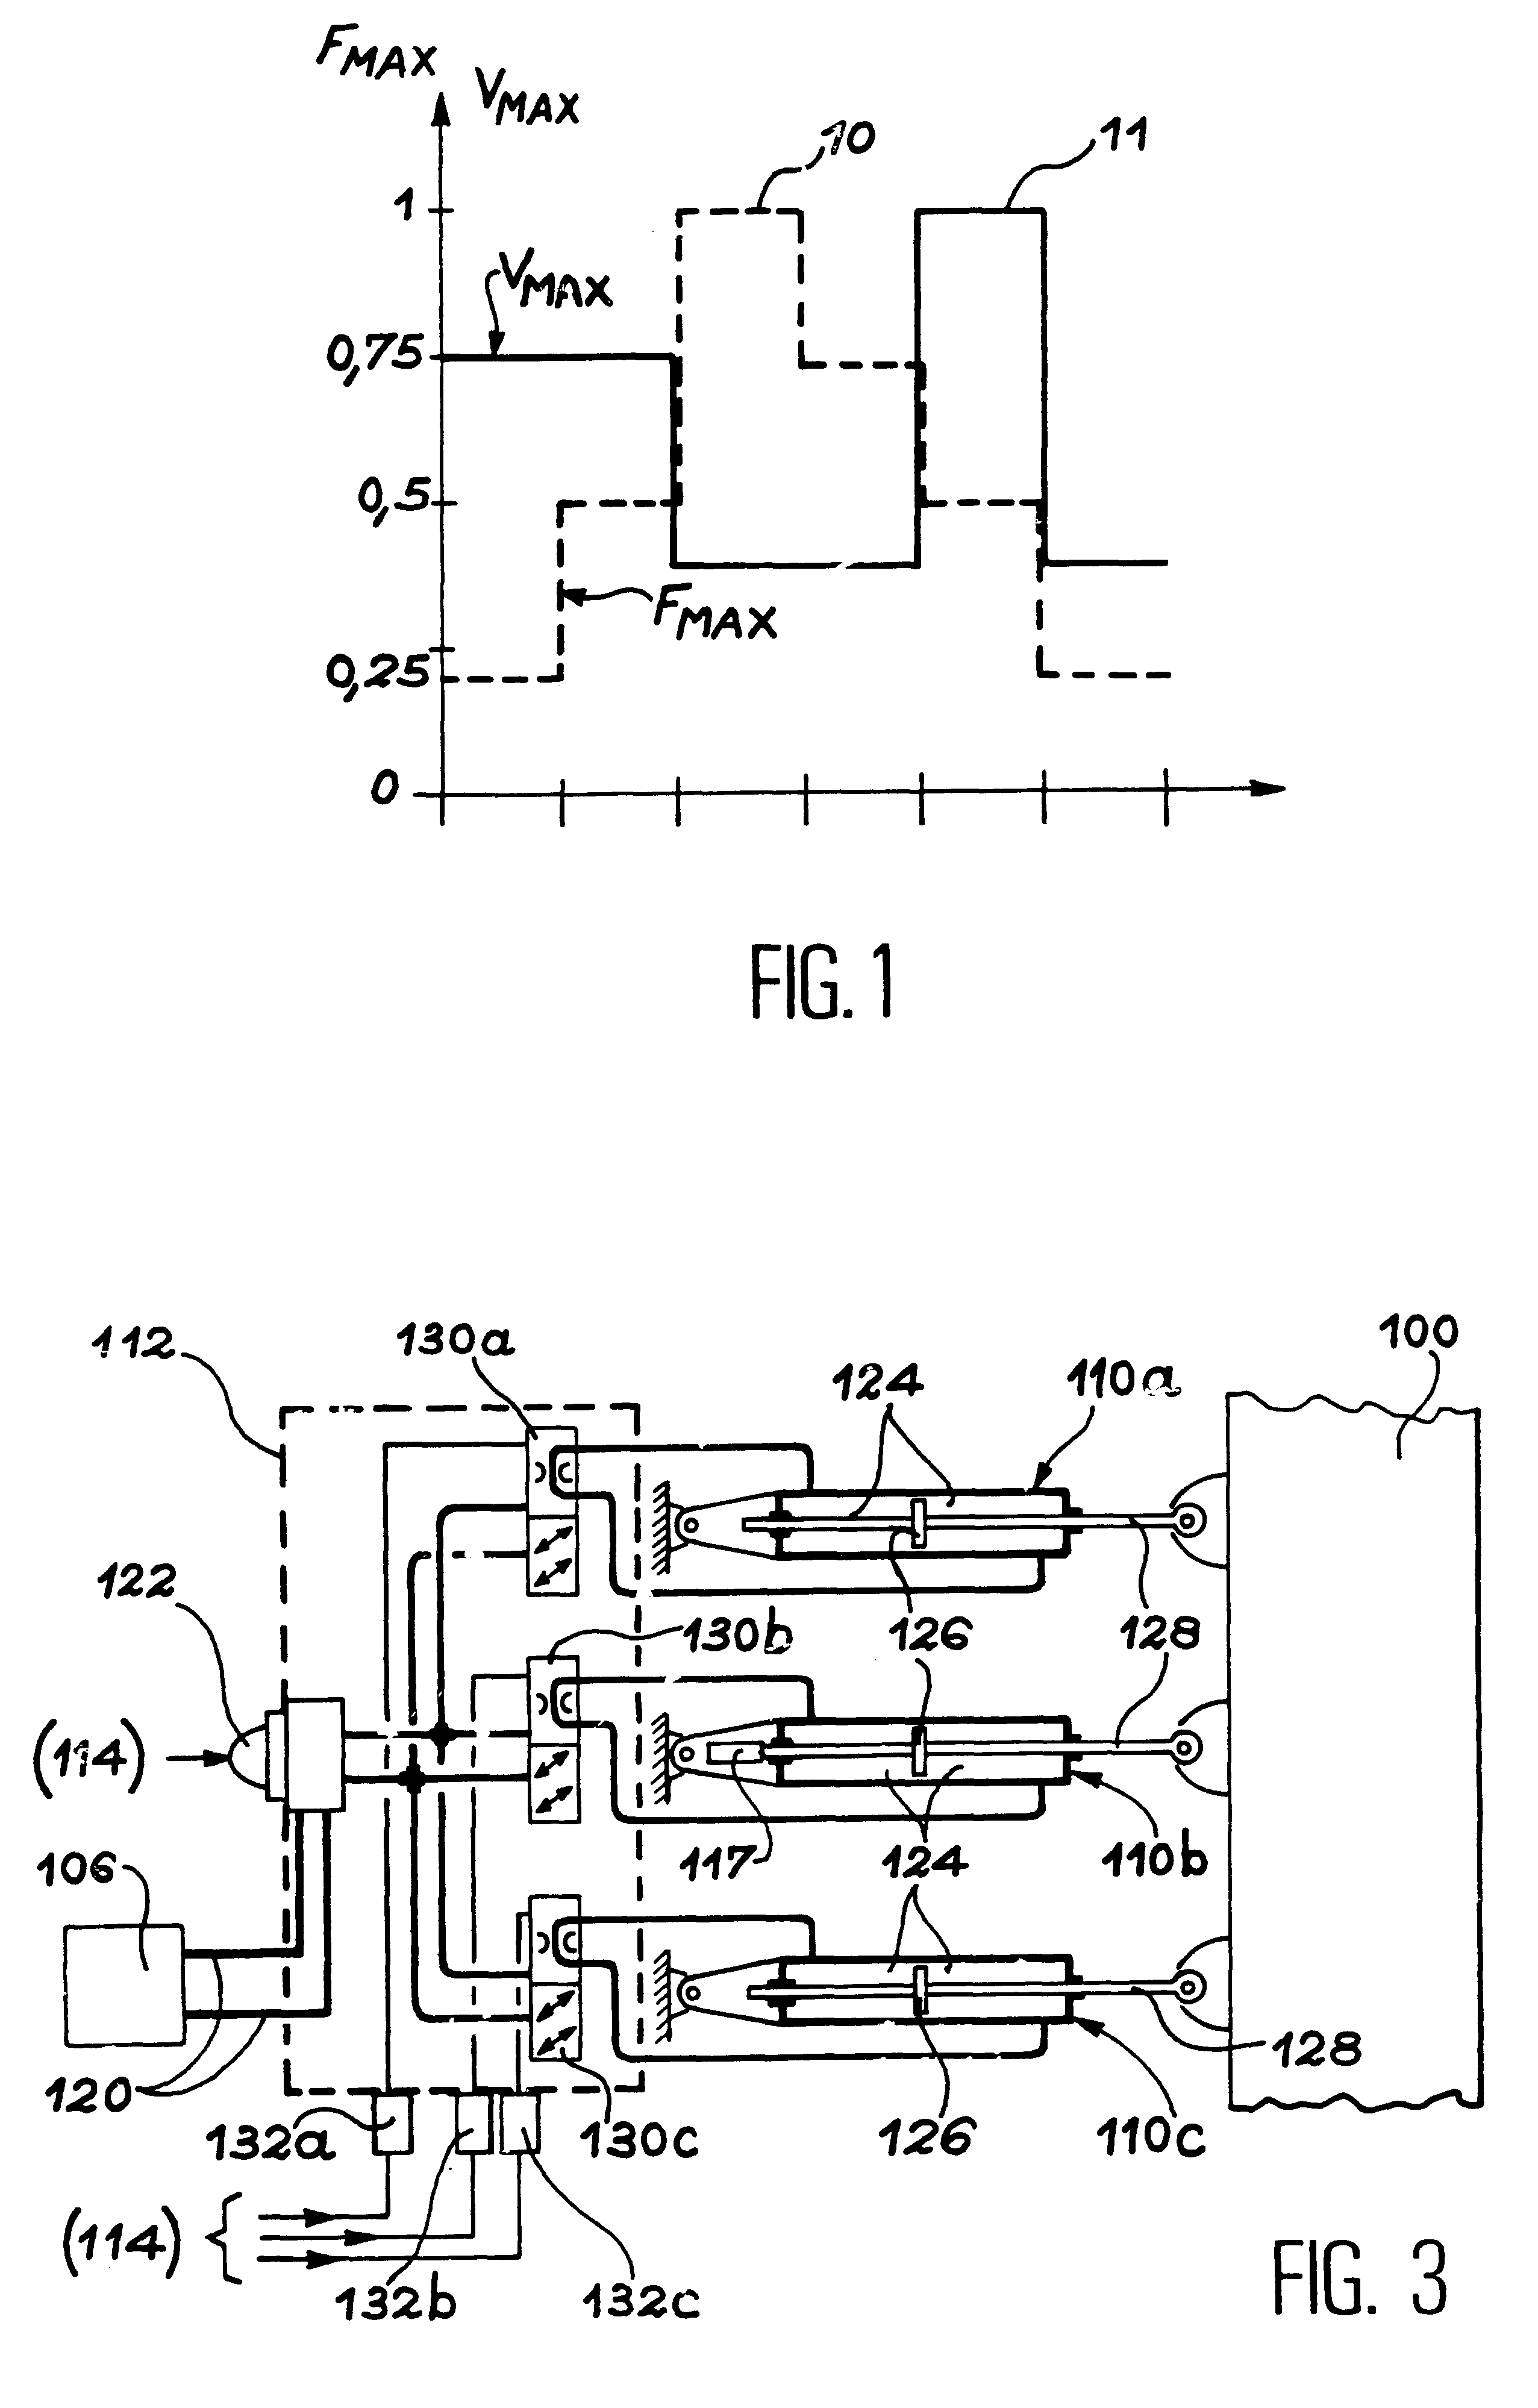 Process and control system for an aircraft control surface actuated by multiple hydraulic jacks and with modular power